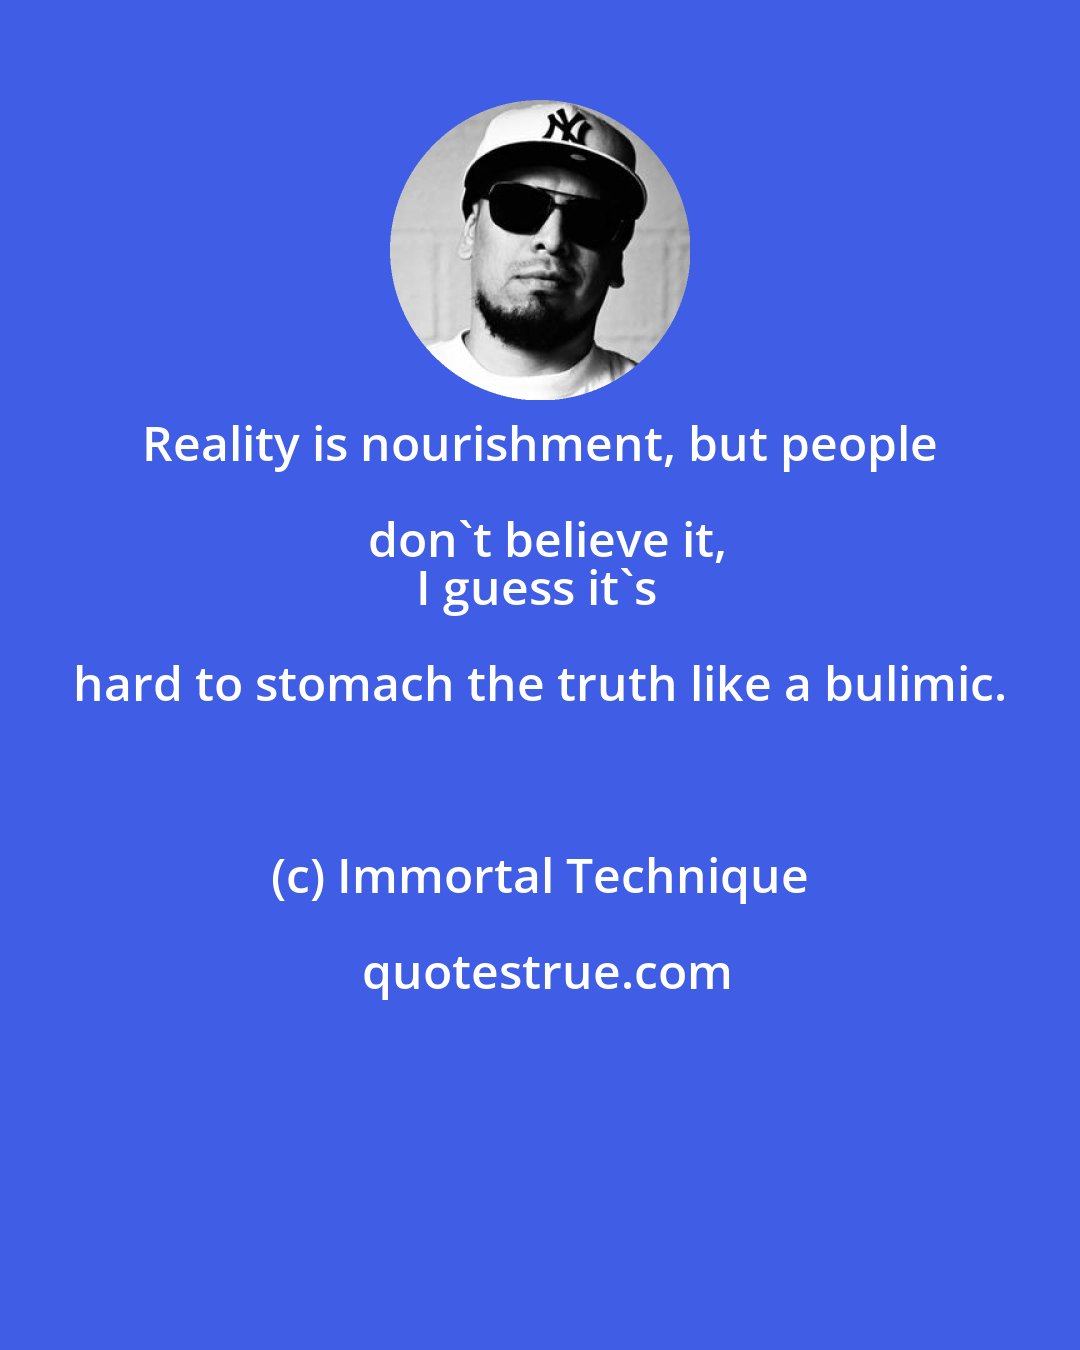 Immortal Technique: Reality is nourishment, but people don't believe it,
I guess it's hard to stomach the truth like a bulimic.